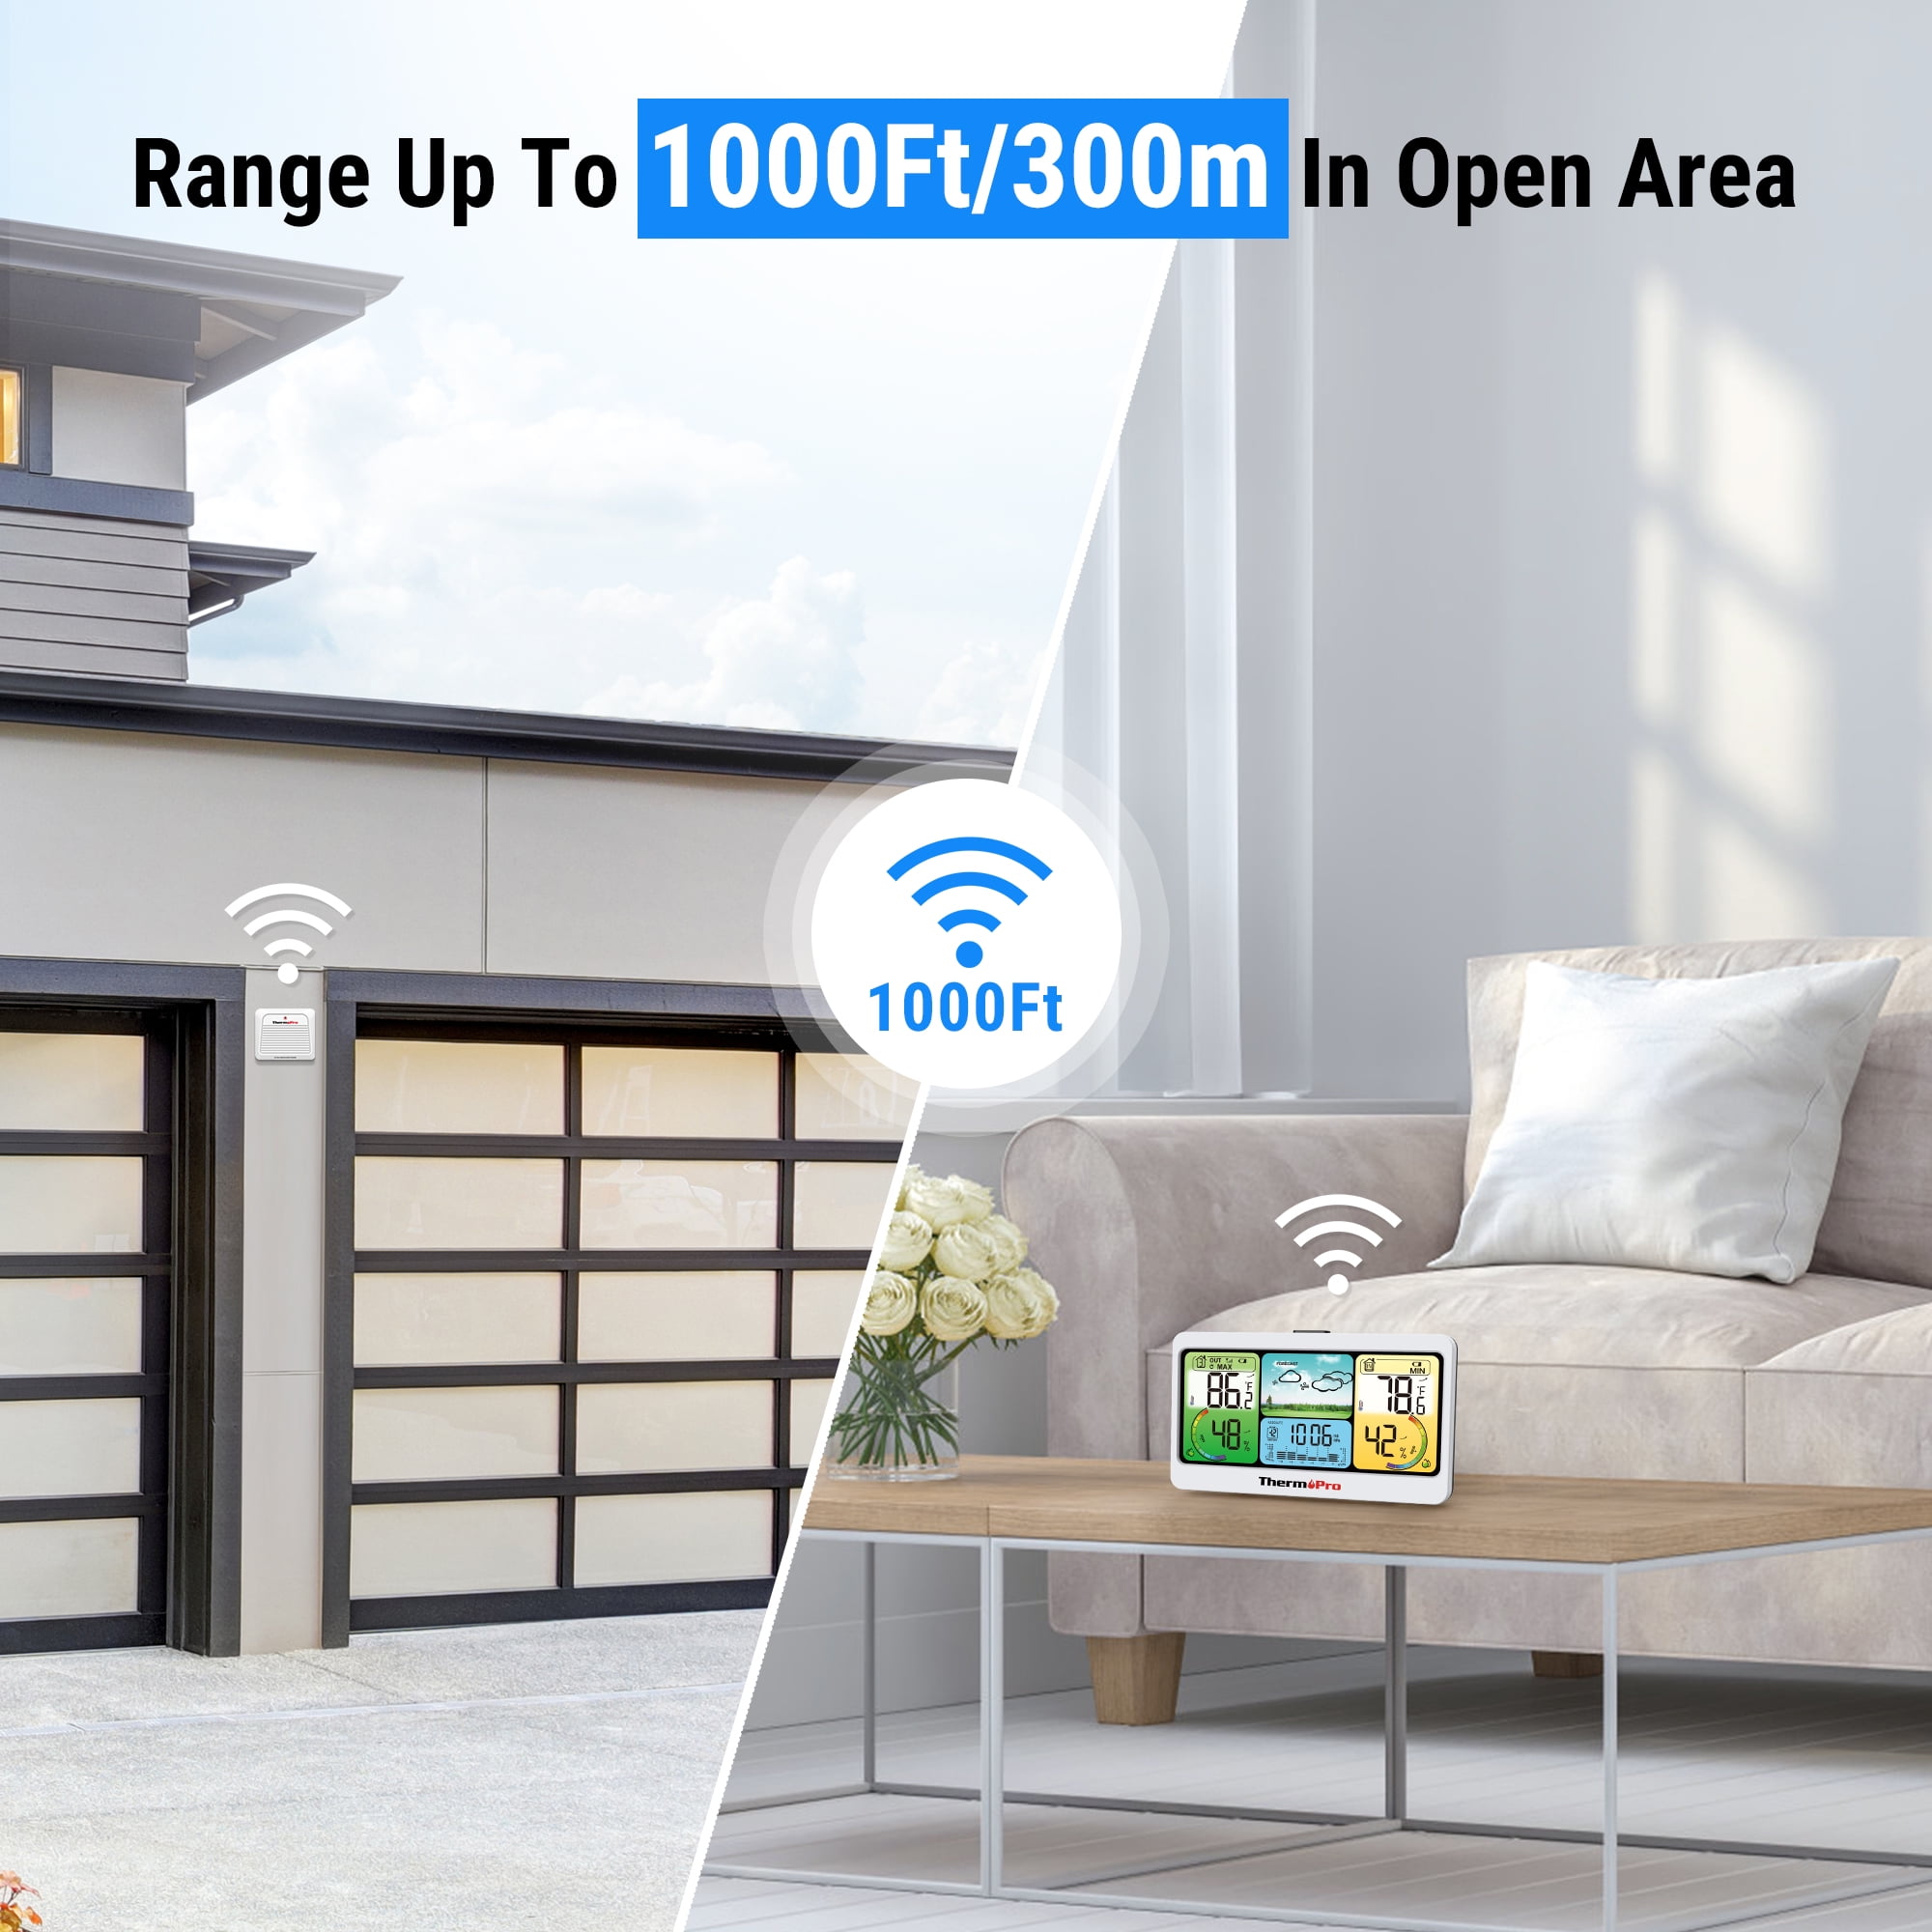 ThermoPro TP200B 150M Wireless Remote Range Weather Station Indoor